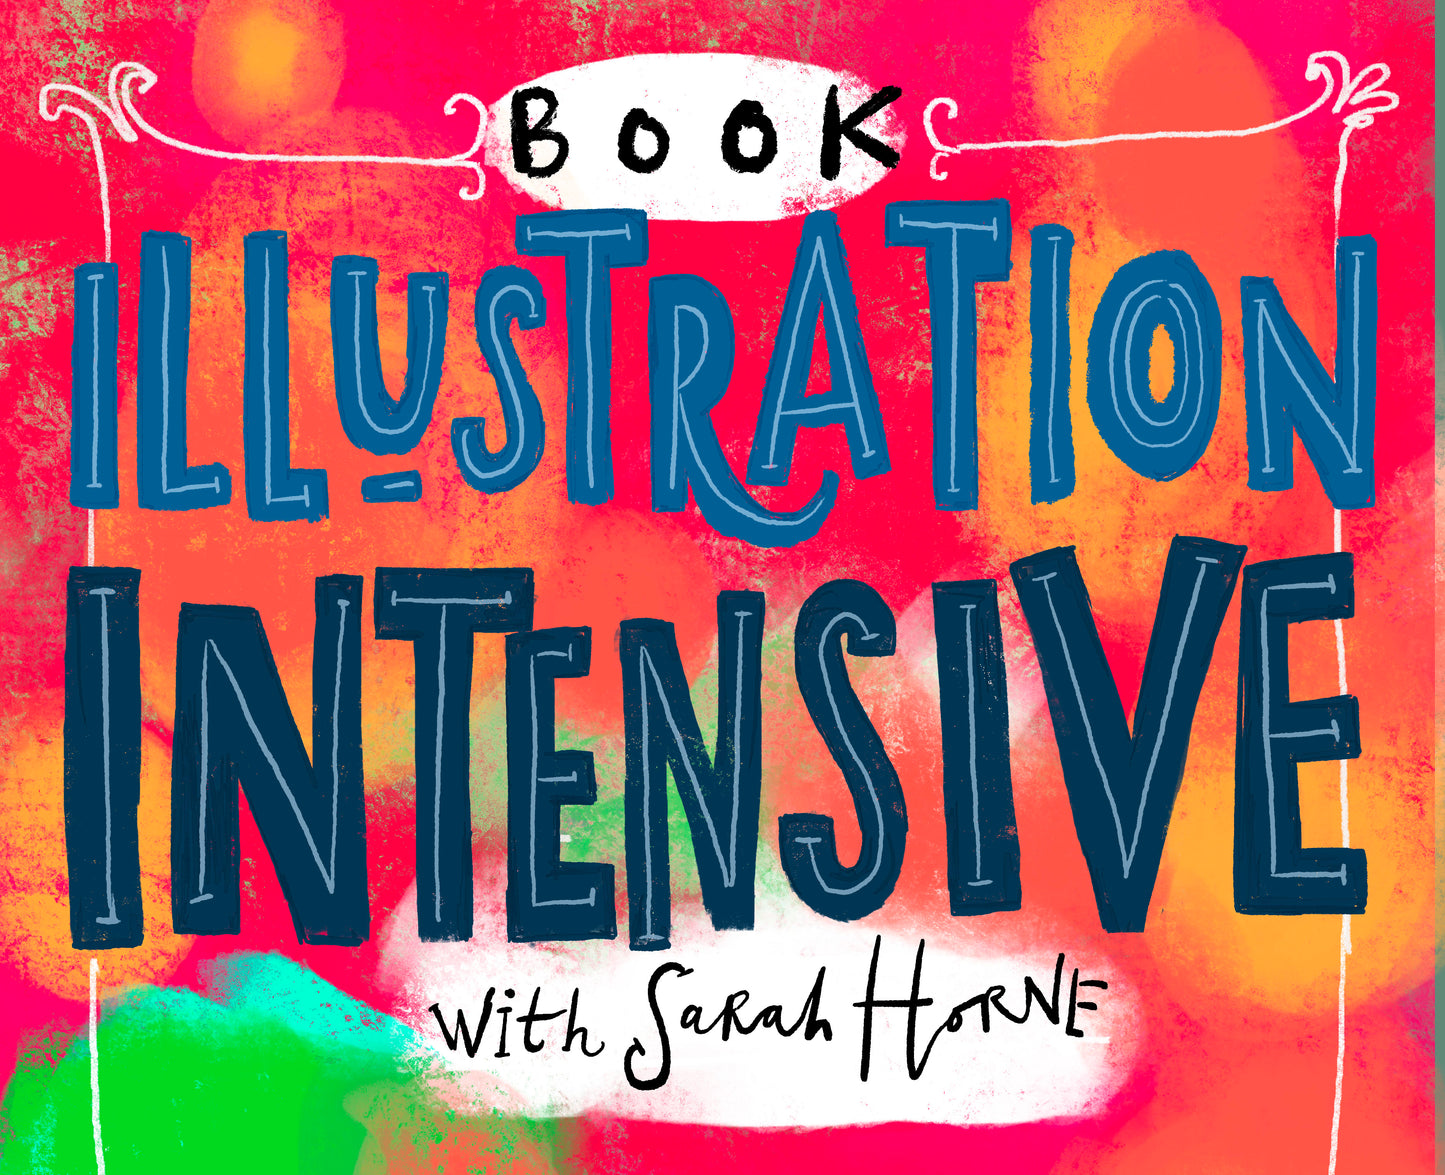 Pay Deposit: Secure your place on the 3 Day Book Illustration Intensive.